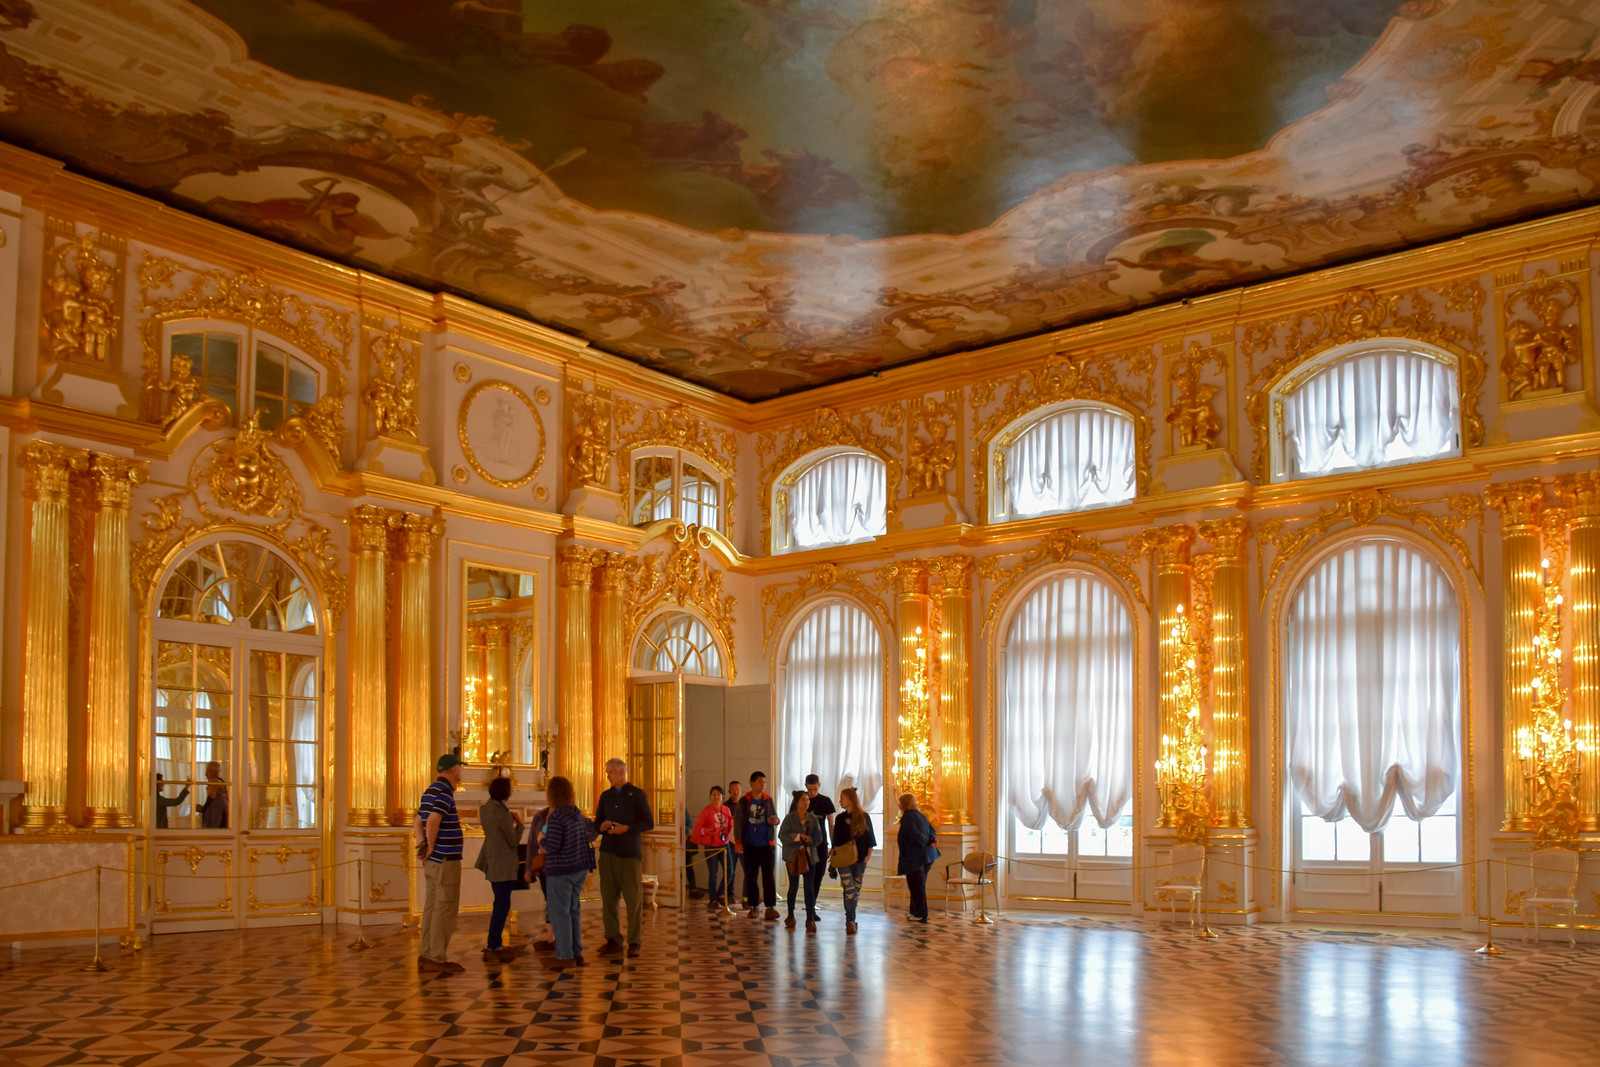 The Great Hall in the Catherine Palace in the town of Tsarskoye Selo, near St. Petersburg, Russia.